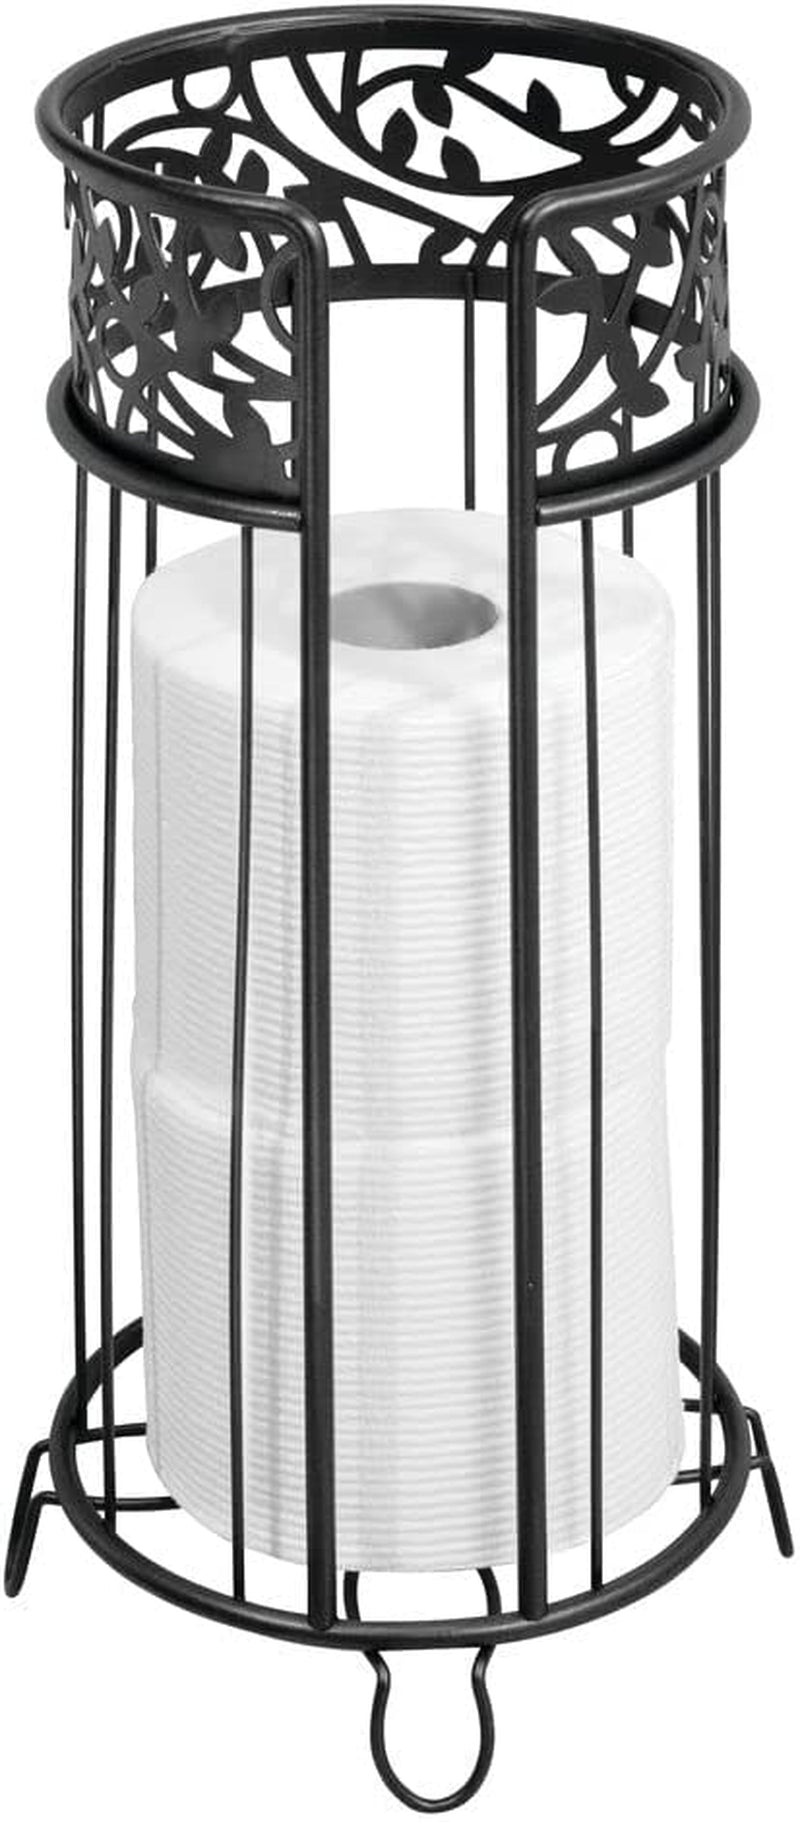 mDesign, Mdesign Decorative Free Standing Toilet Paper Holder Stand with Storage for 3 Rolls of Toilet Tissue - for Bathroom/Powder Room - Holds Mega Rolls - Durable Metal Wire - White